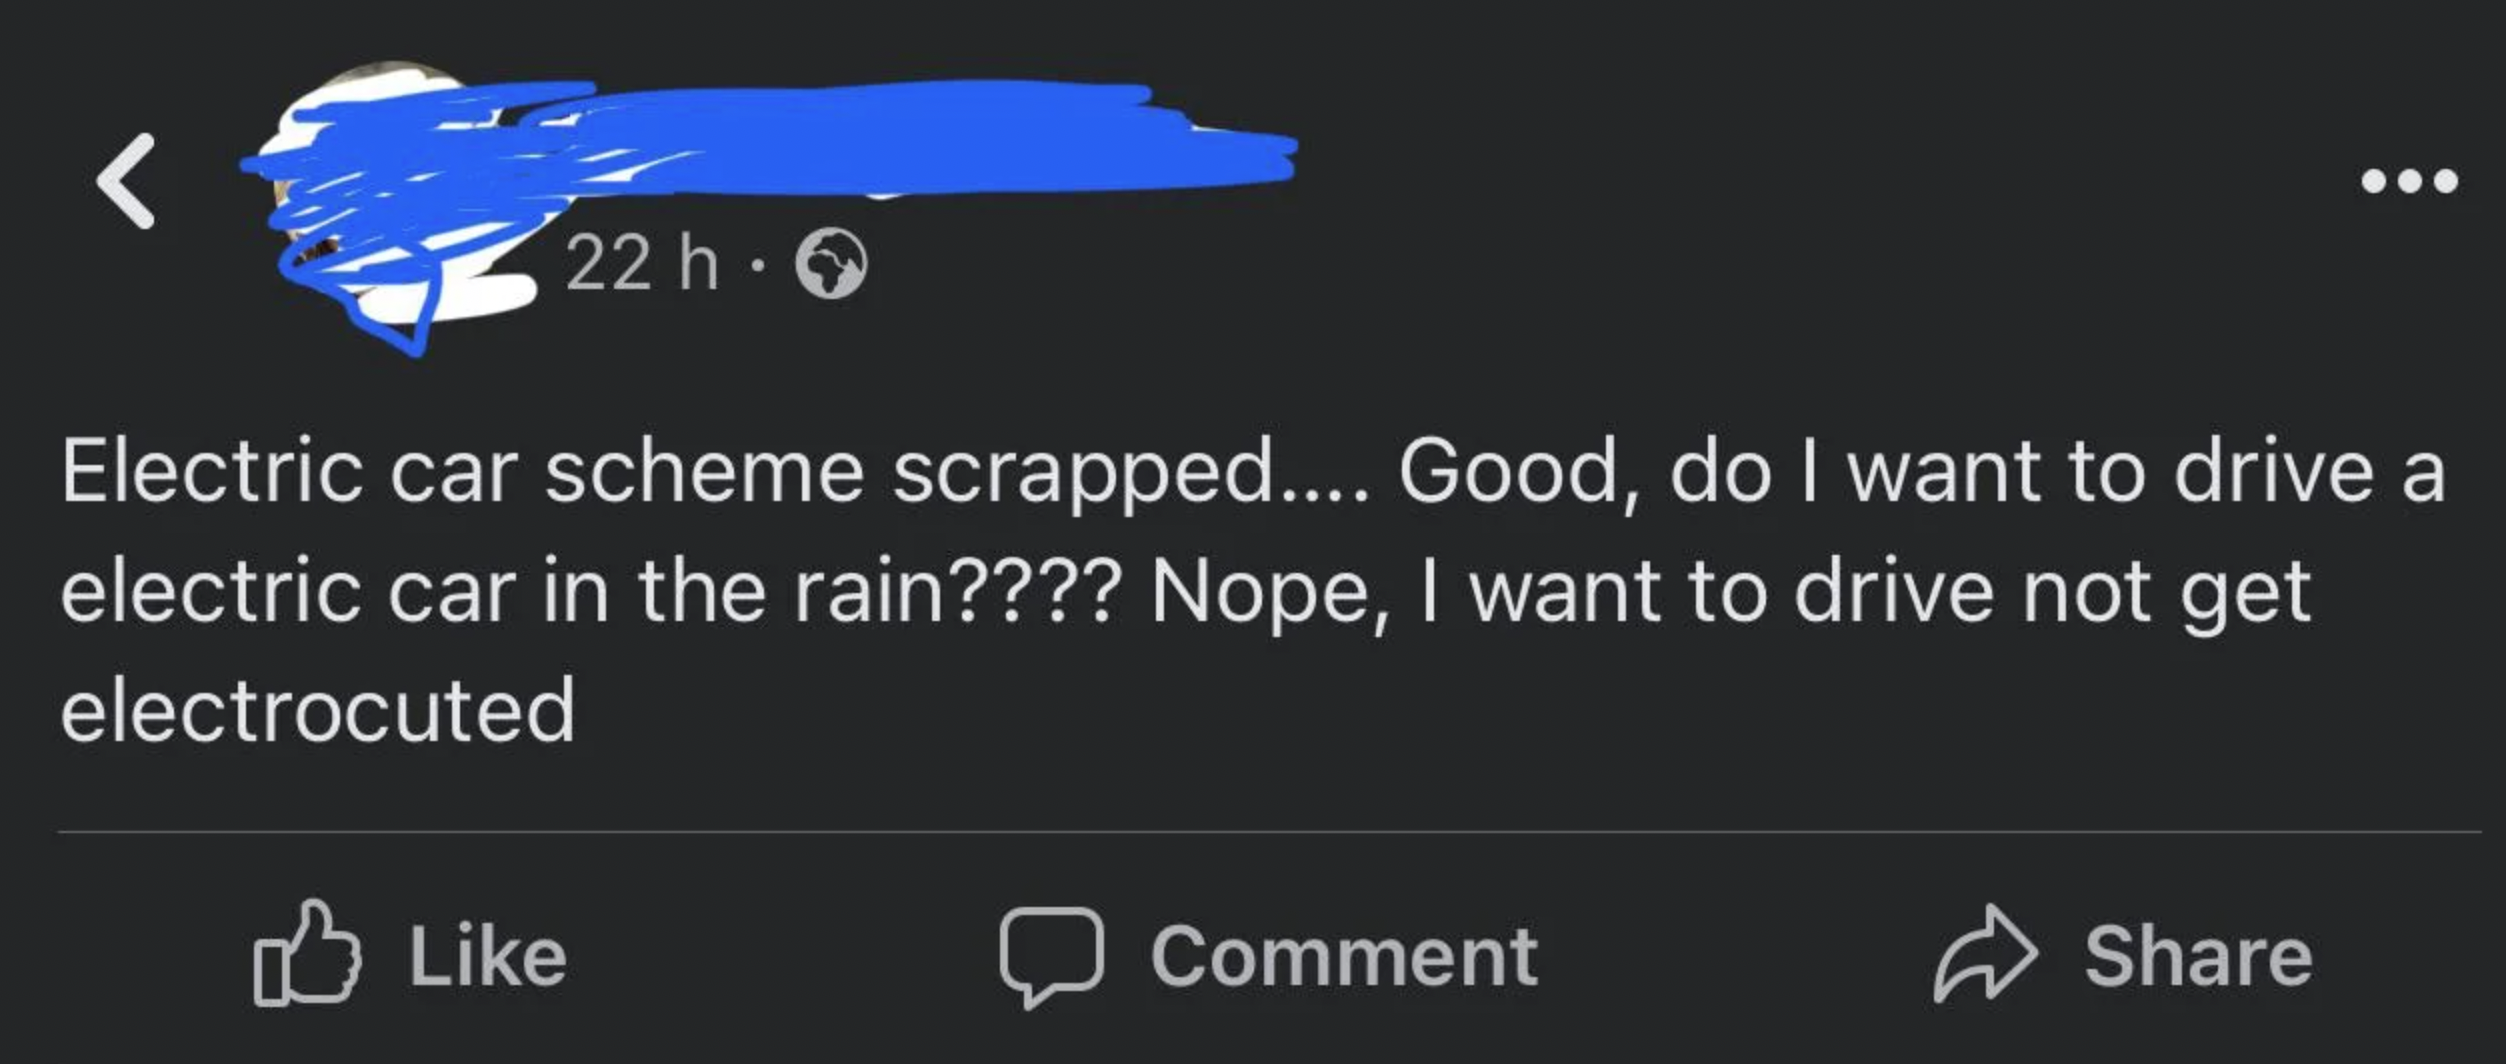 Dumb Facepalms - Good, do I want to drive a electric car in the rain???? Nope,